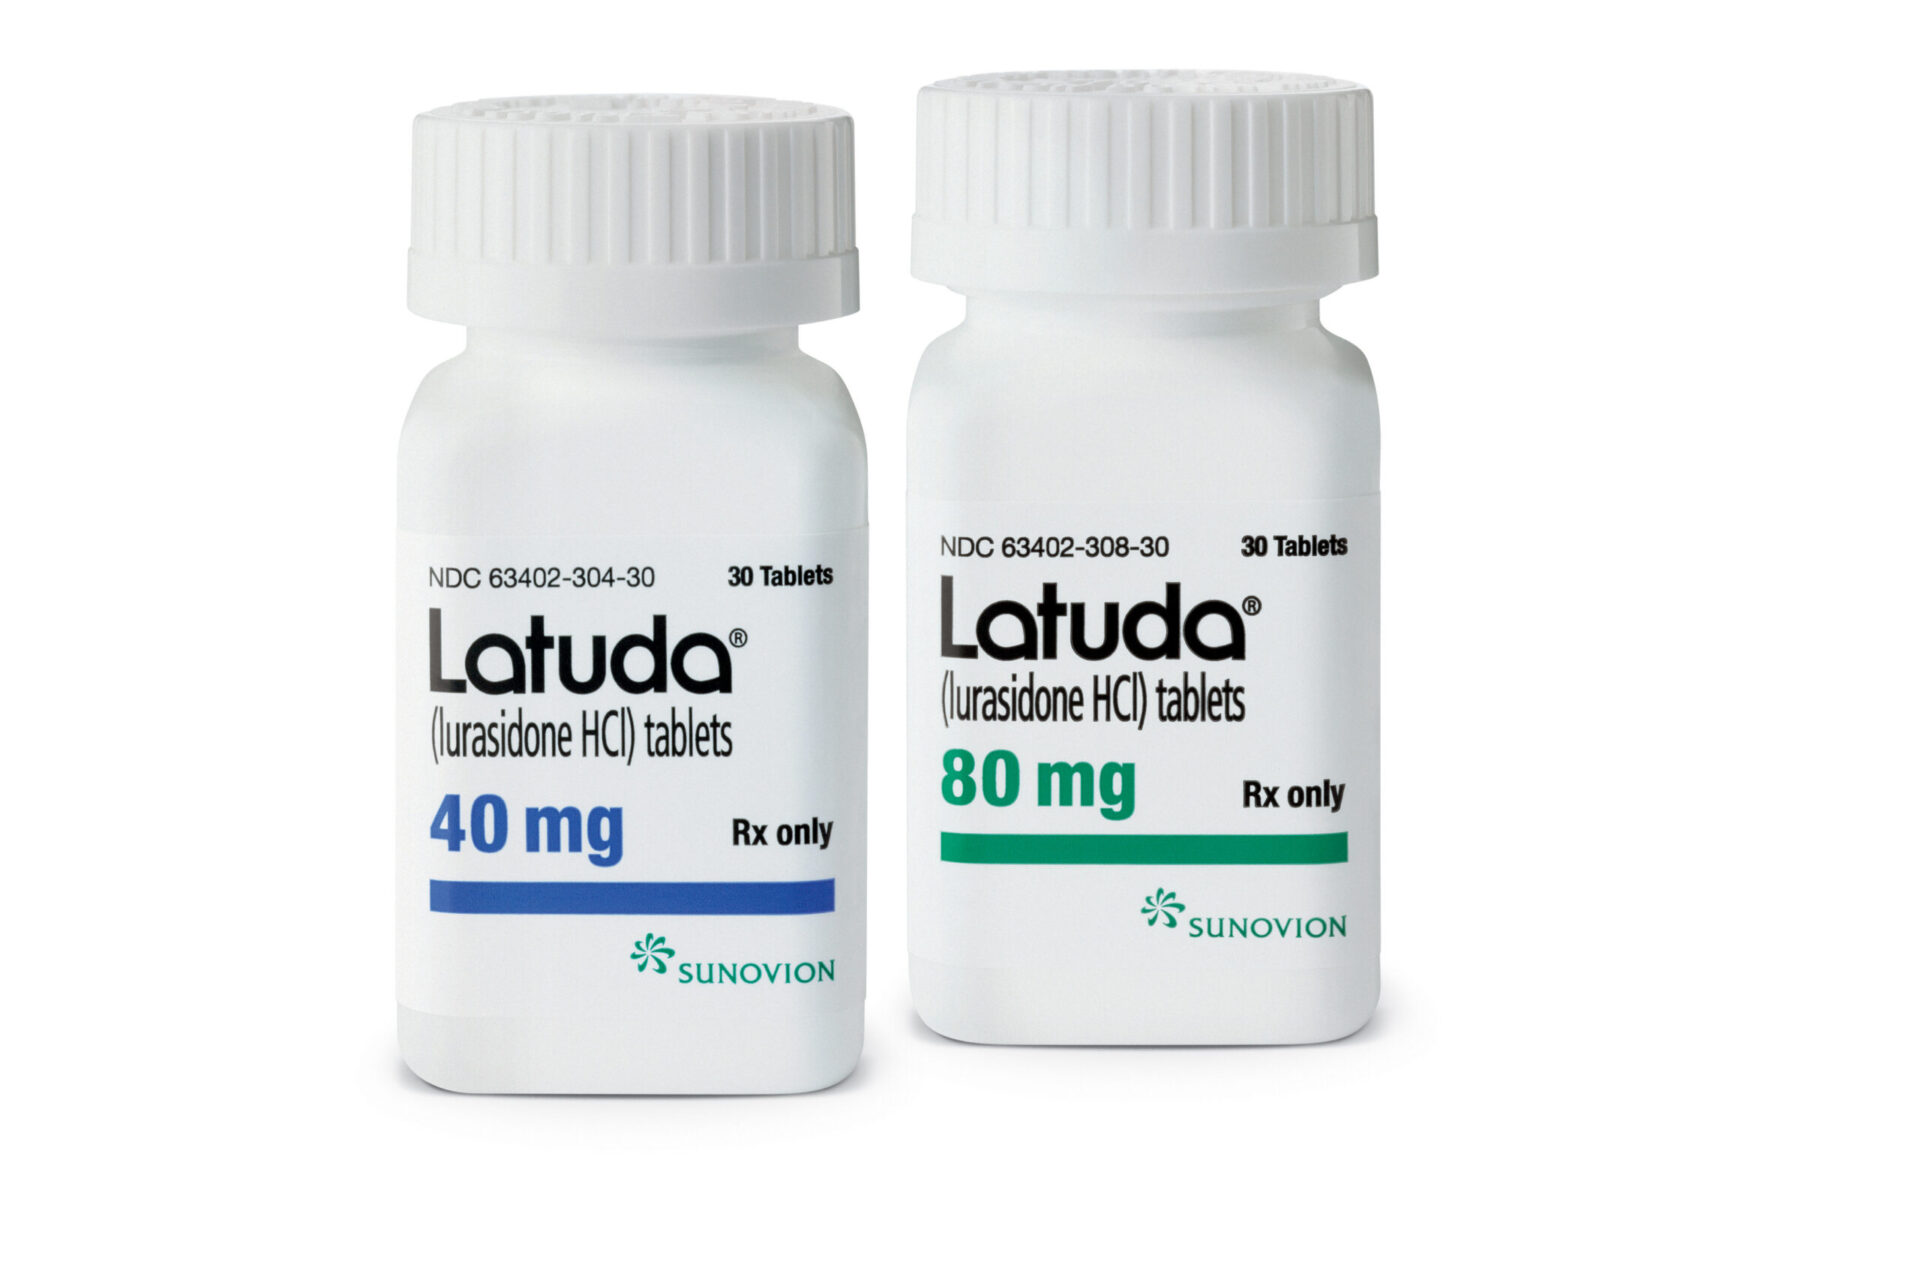 What Does Latuda Treat?